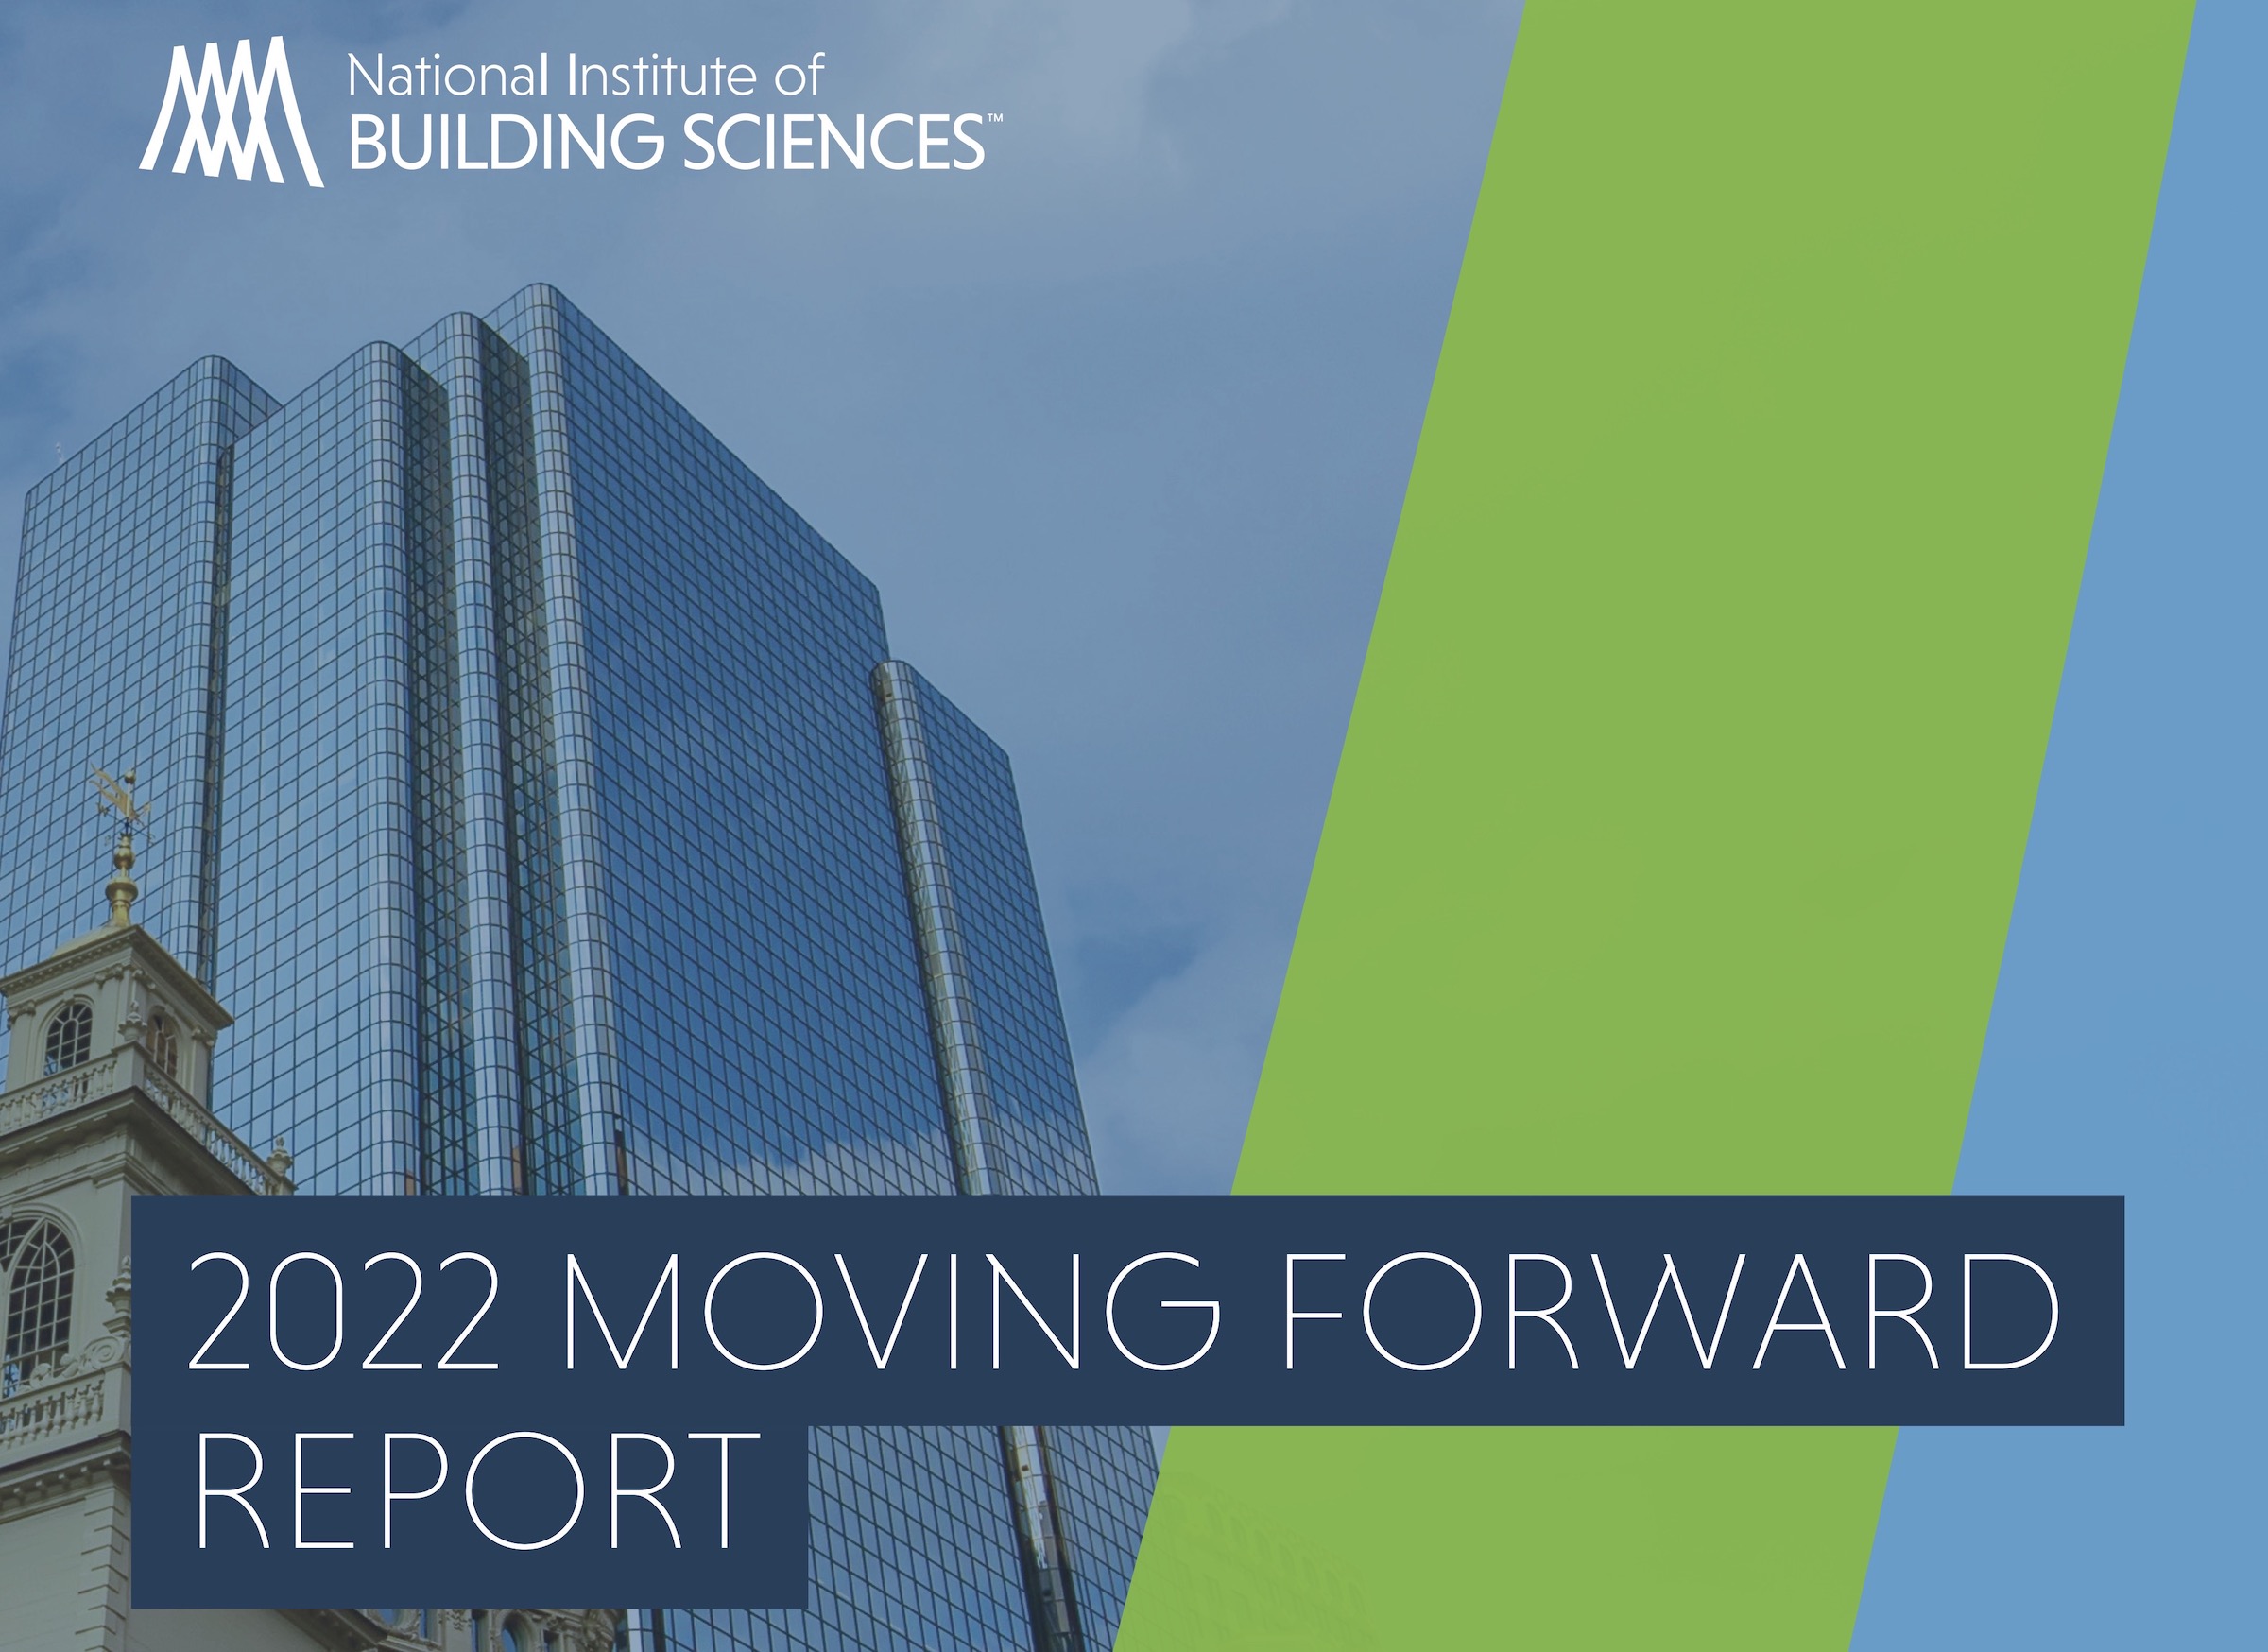 Decarbonizing the U.S. building sector will require massive, coordinated effort